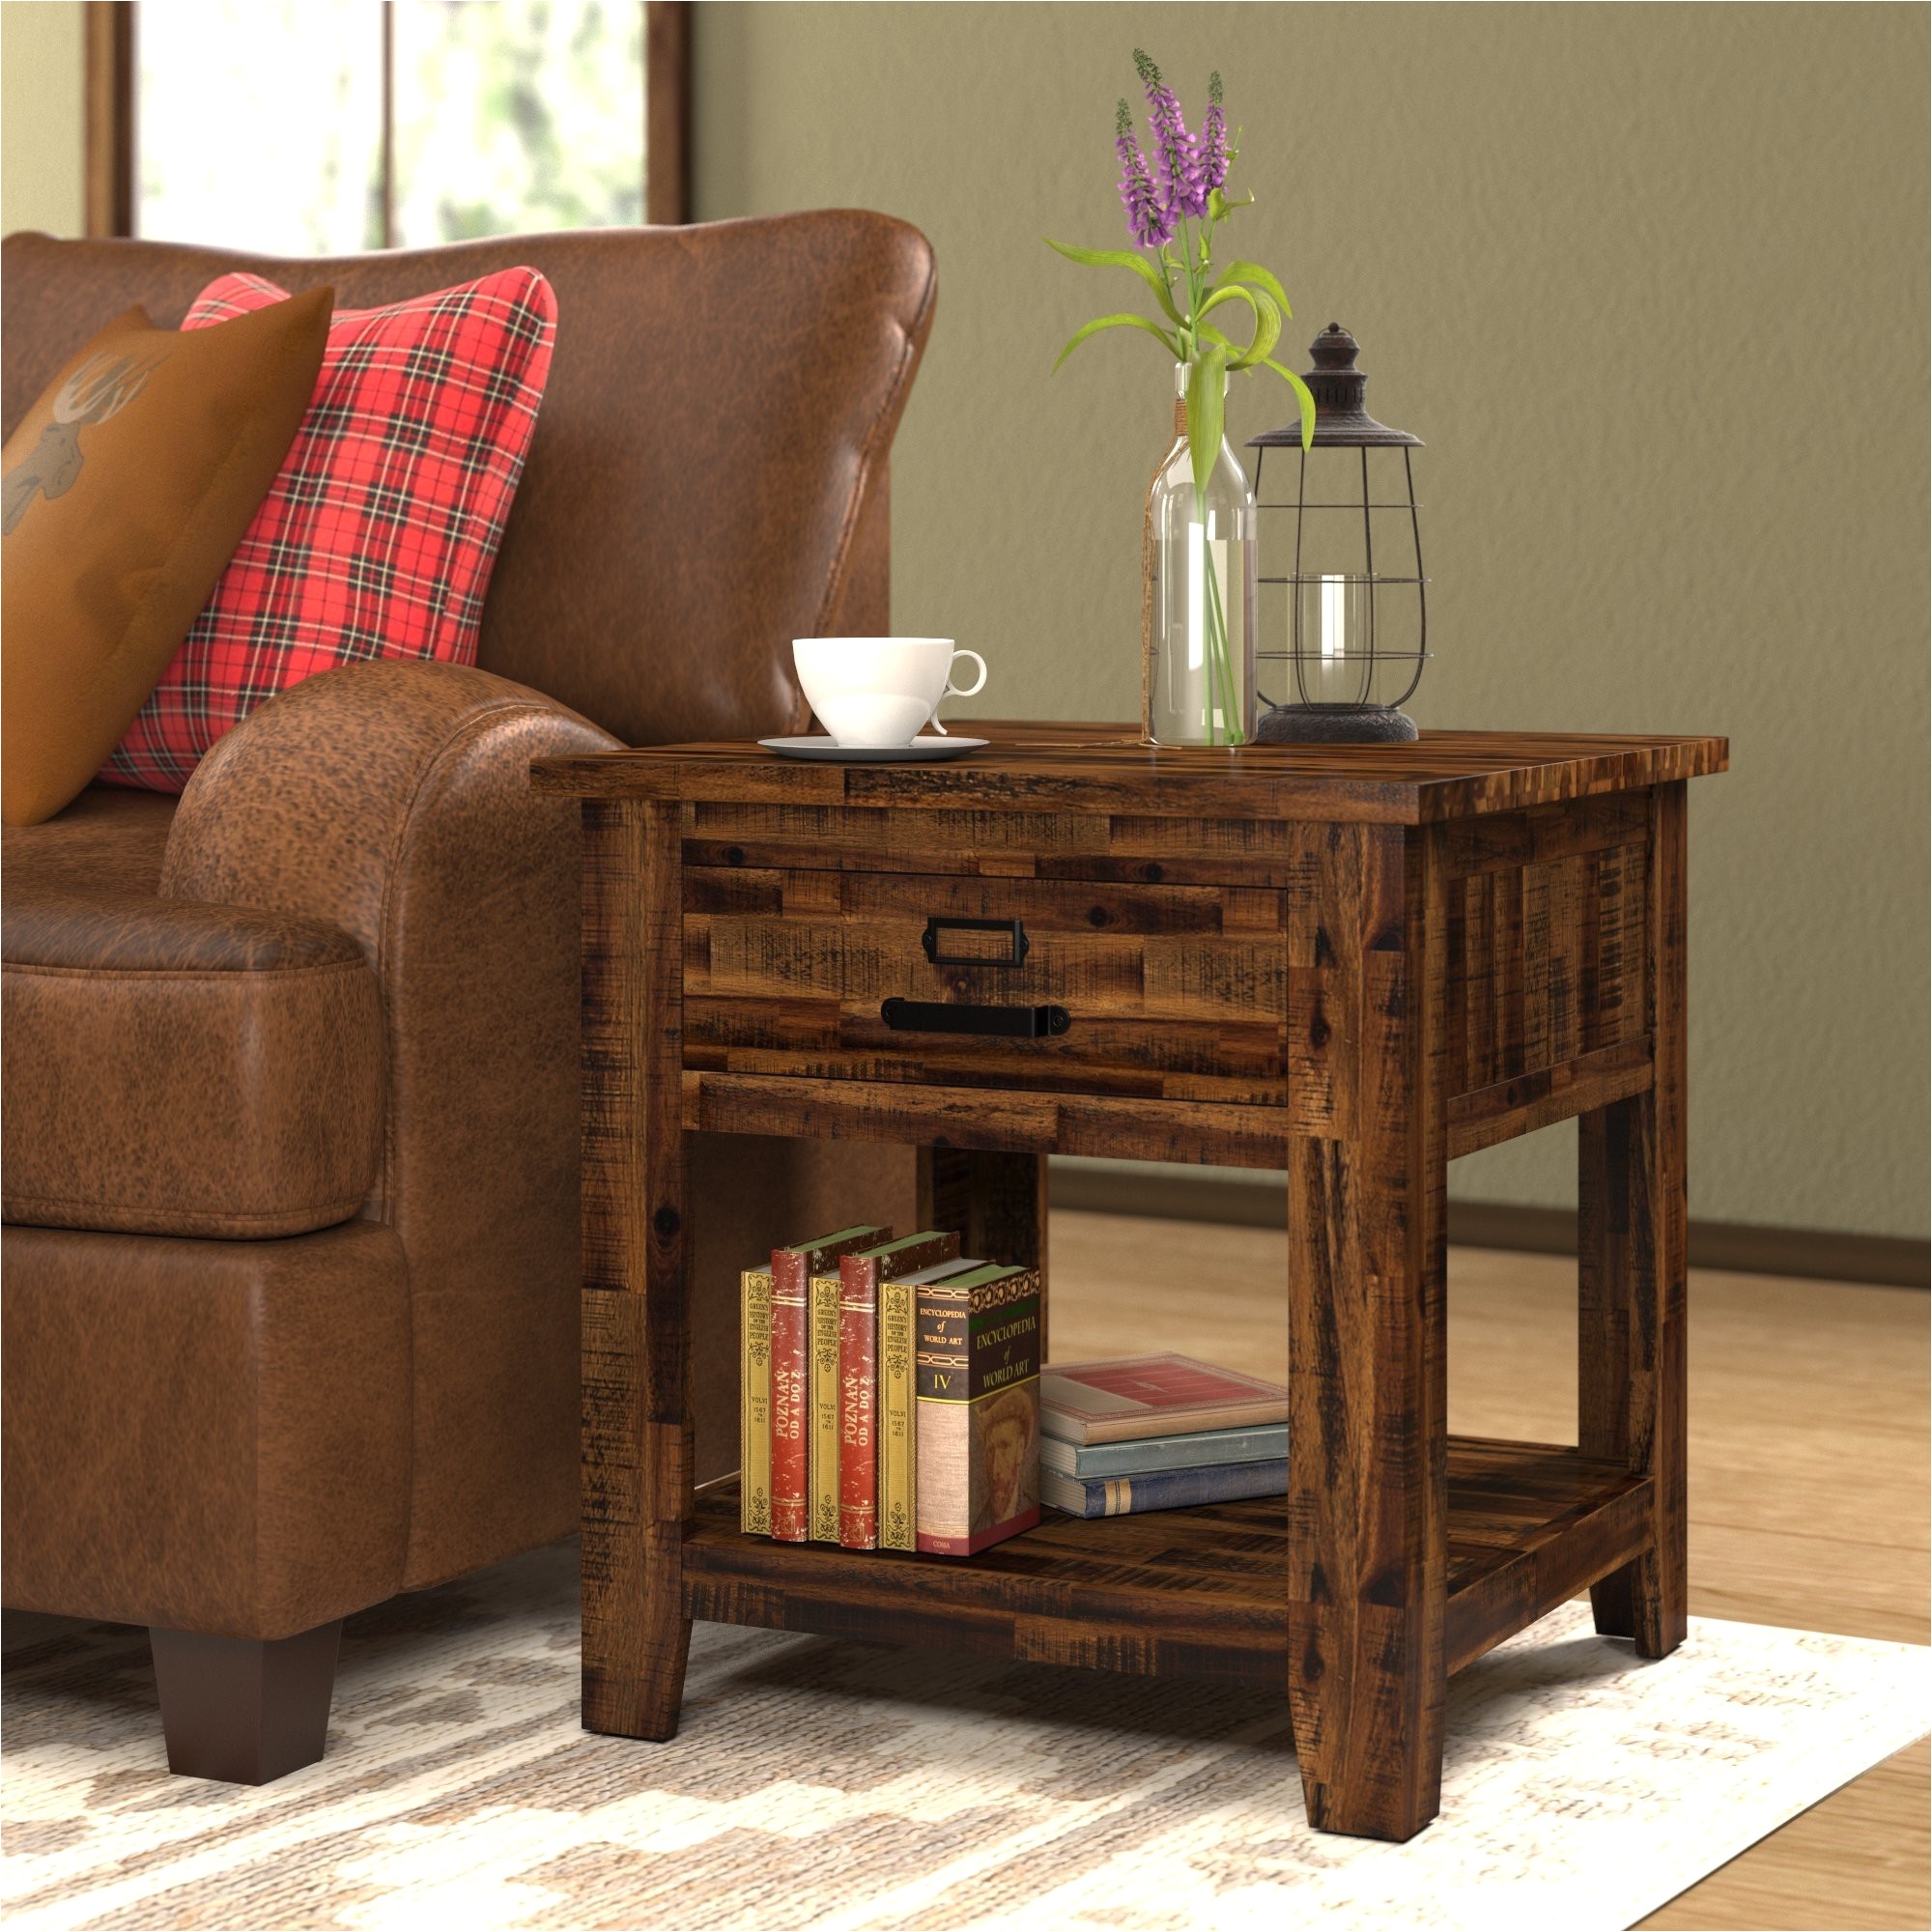 14 Cheap Coffee and End Tables s